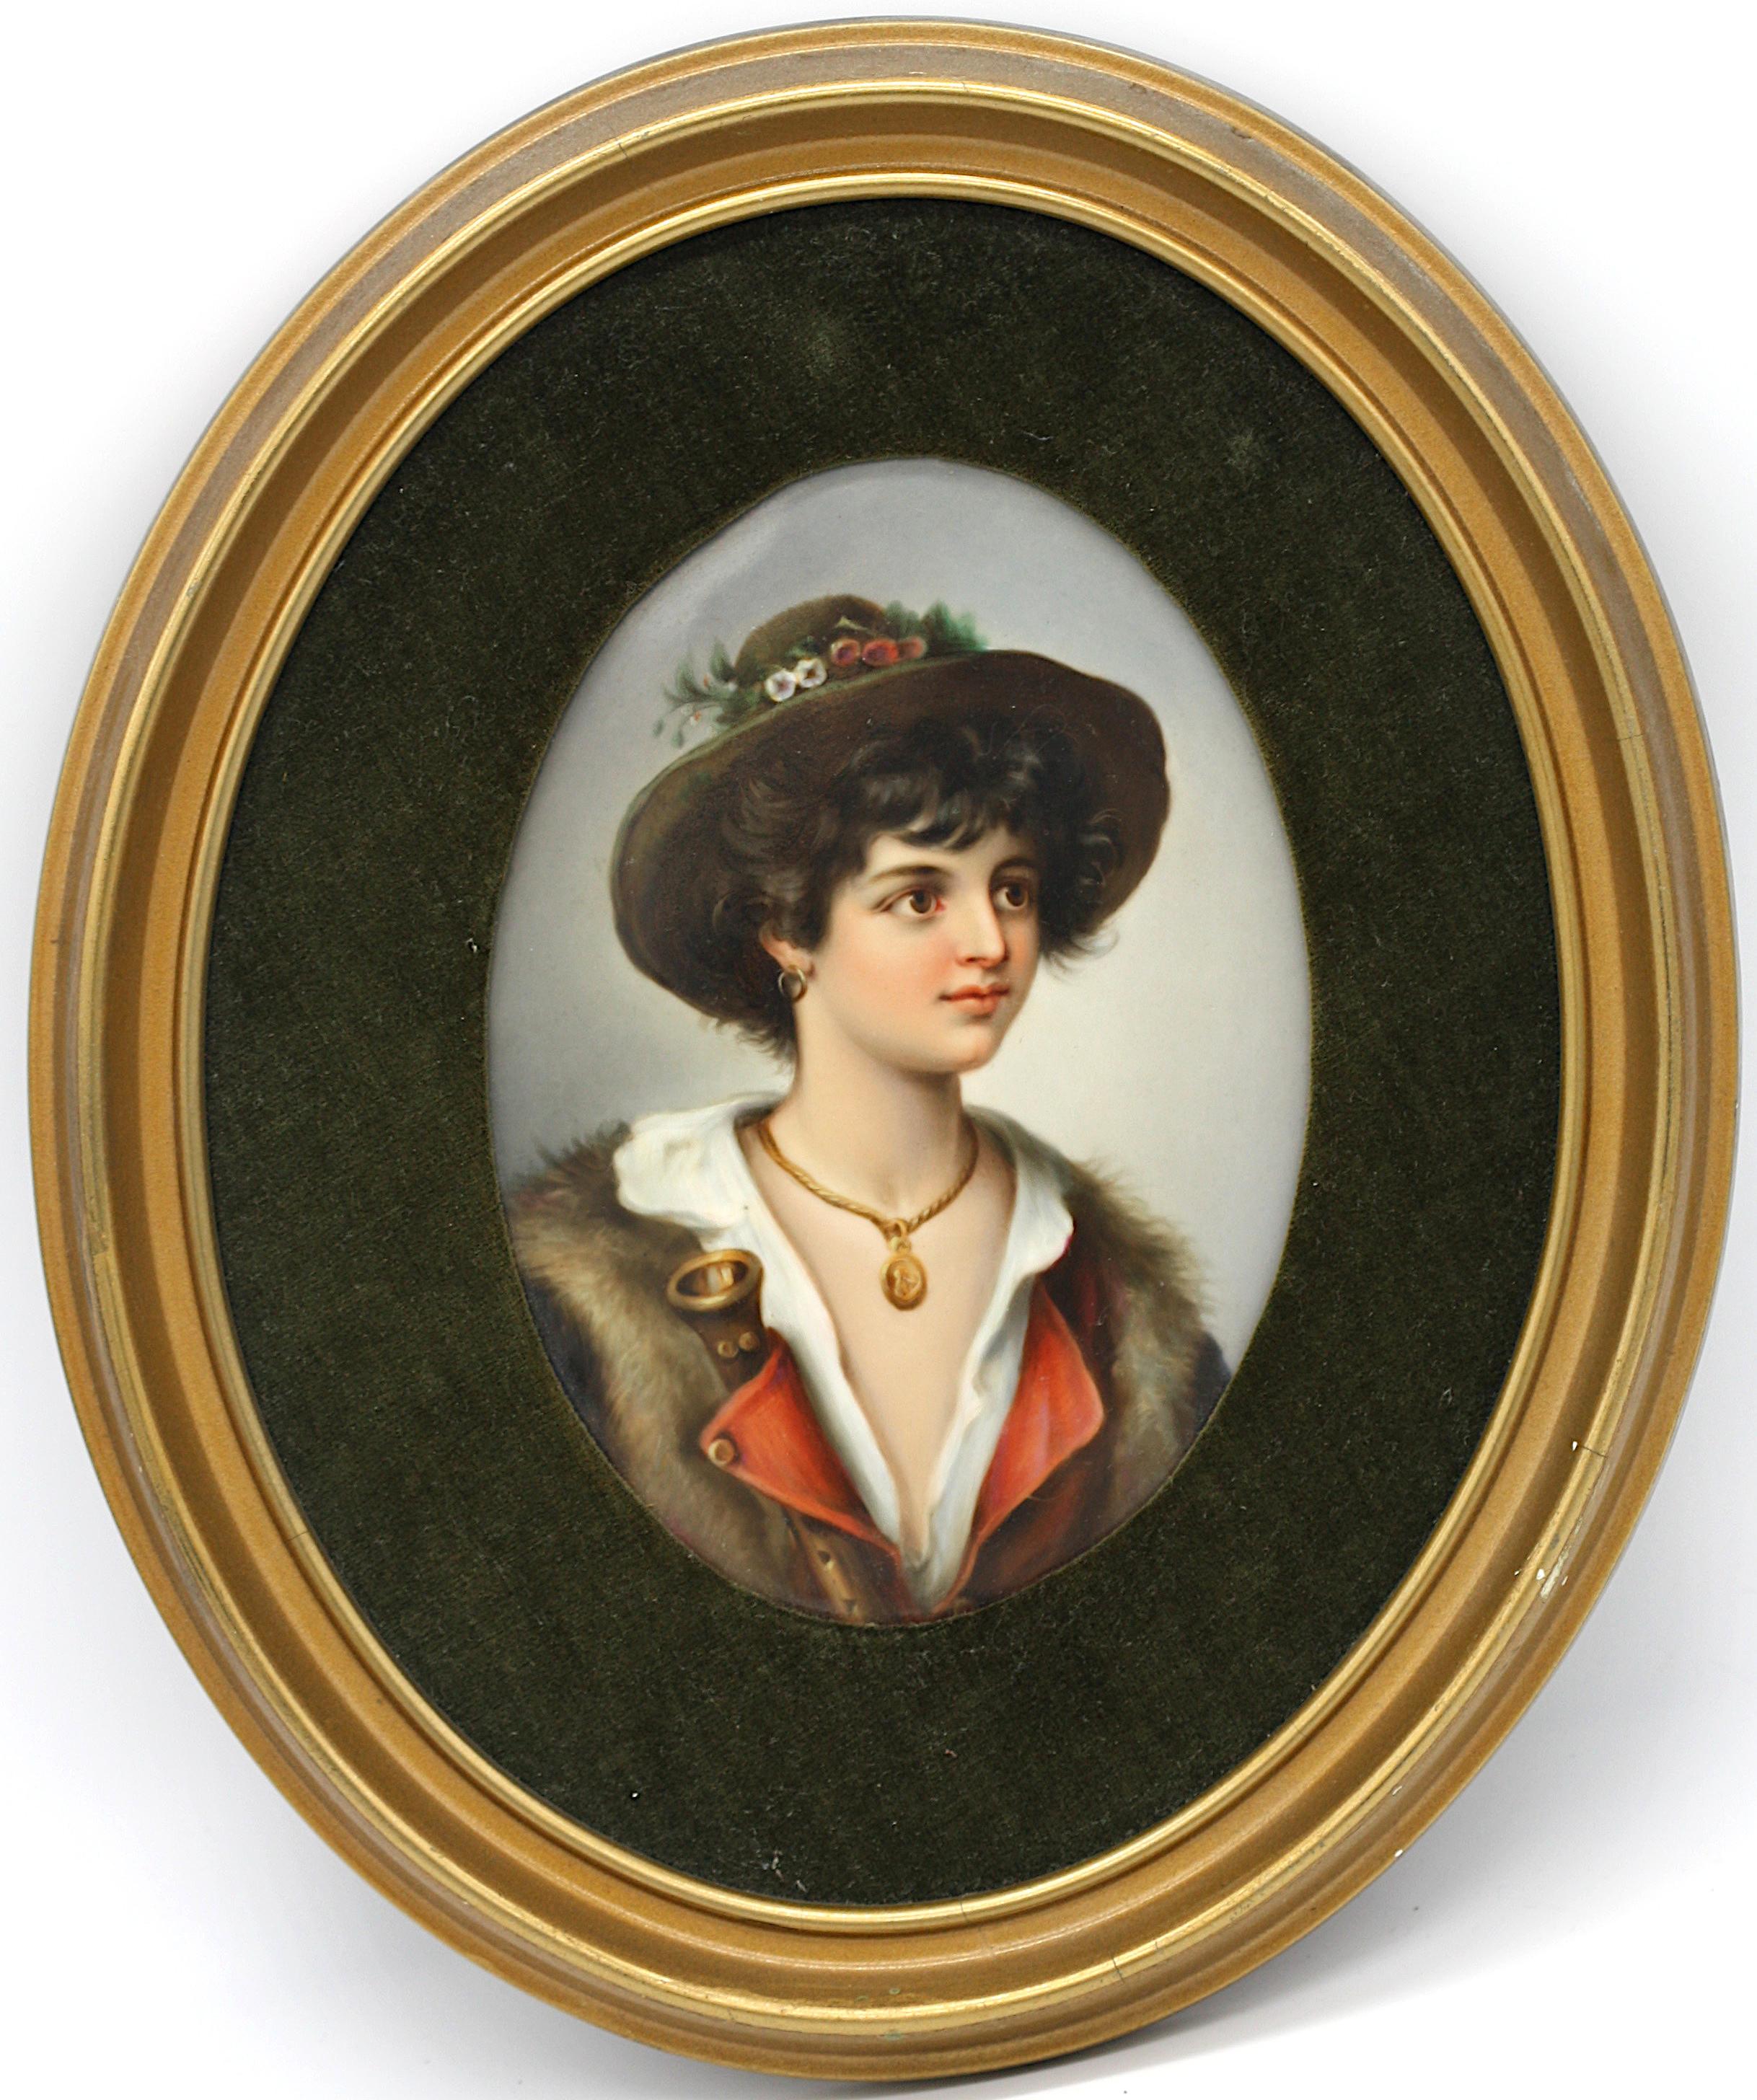 Continental porcelain oval plaque.
late 19th century.
Depicting an Italian boy.
Plaque size height 6.5 in. (16.51 cm.), width 4.75 in. (6.98 cm)
Provenance:
Elizabeth Valentino.
 